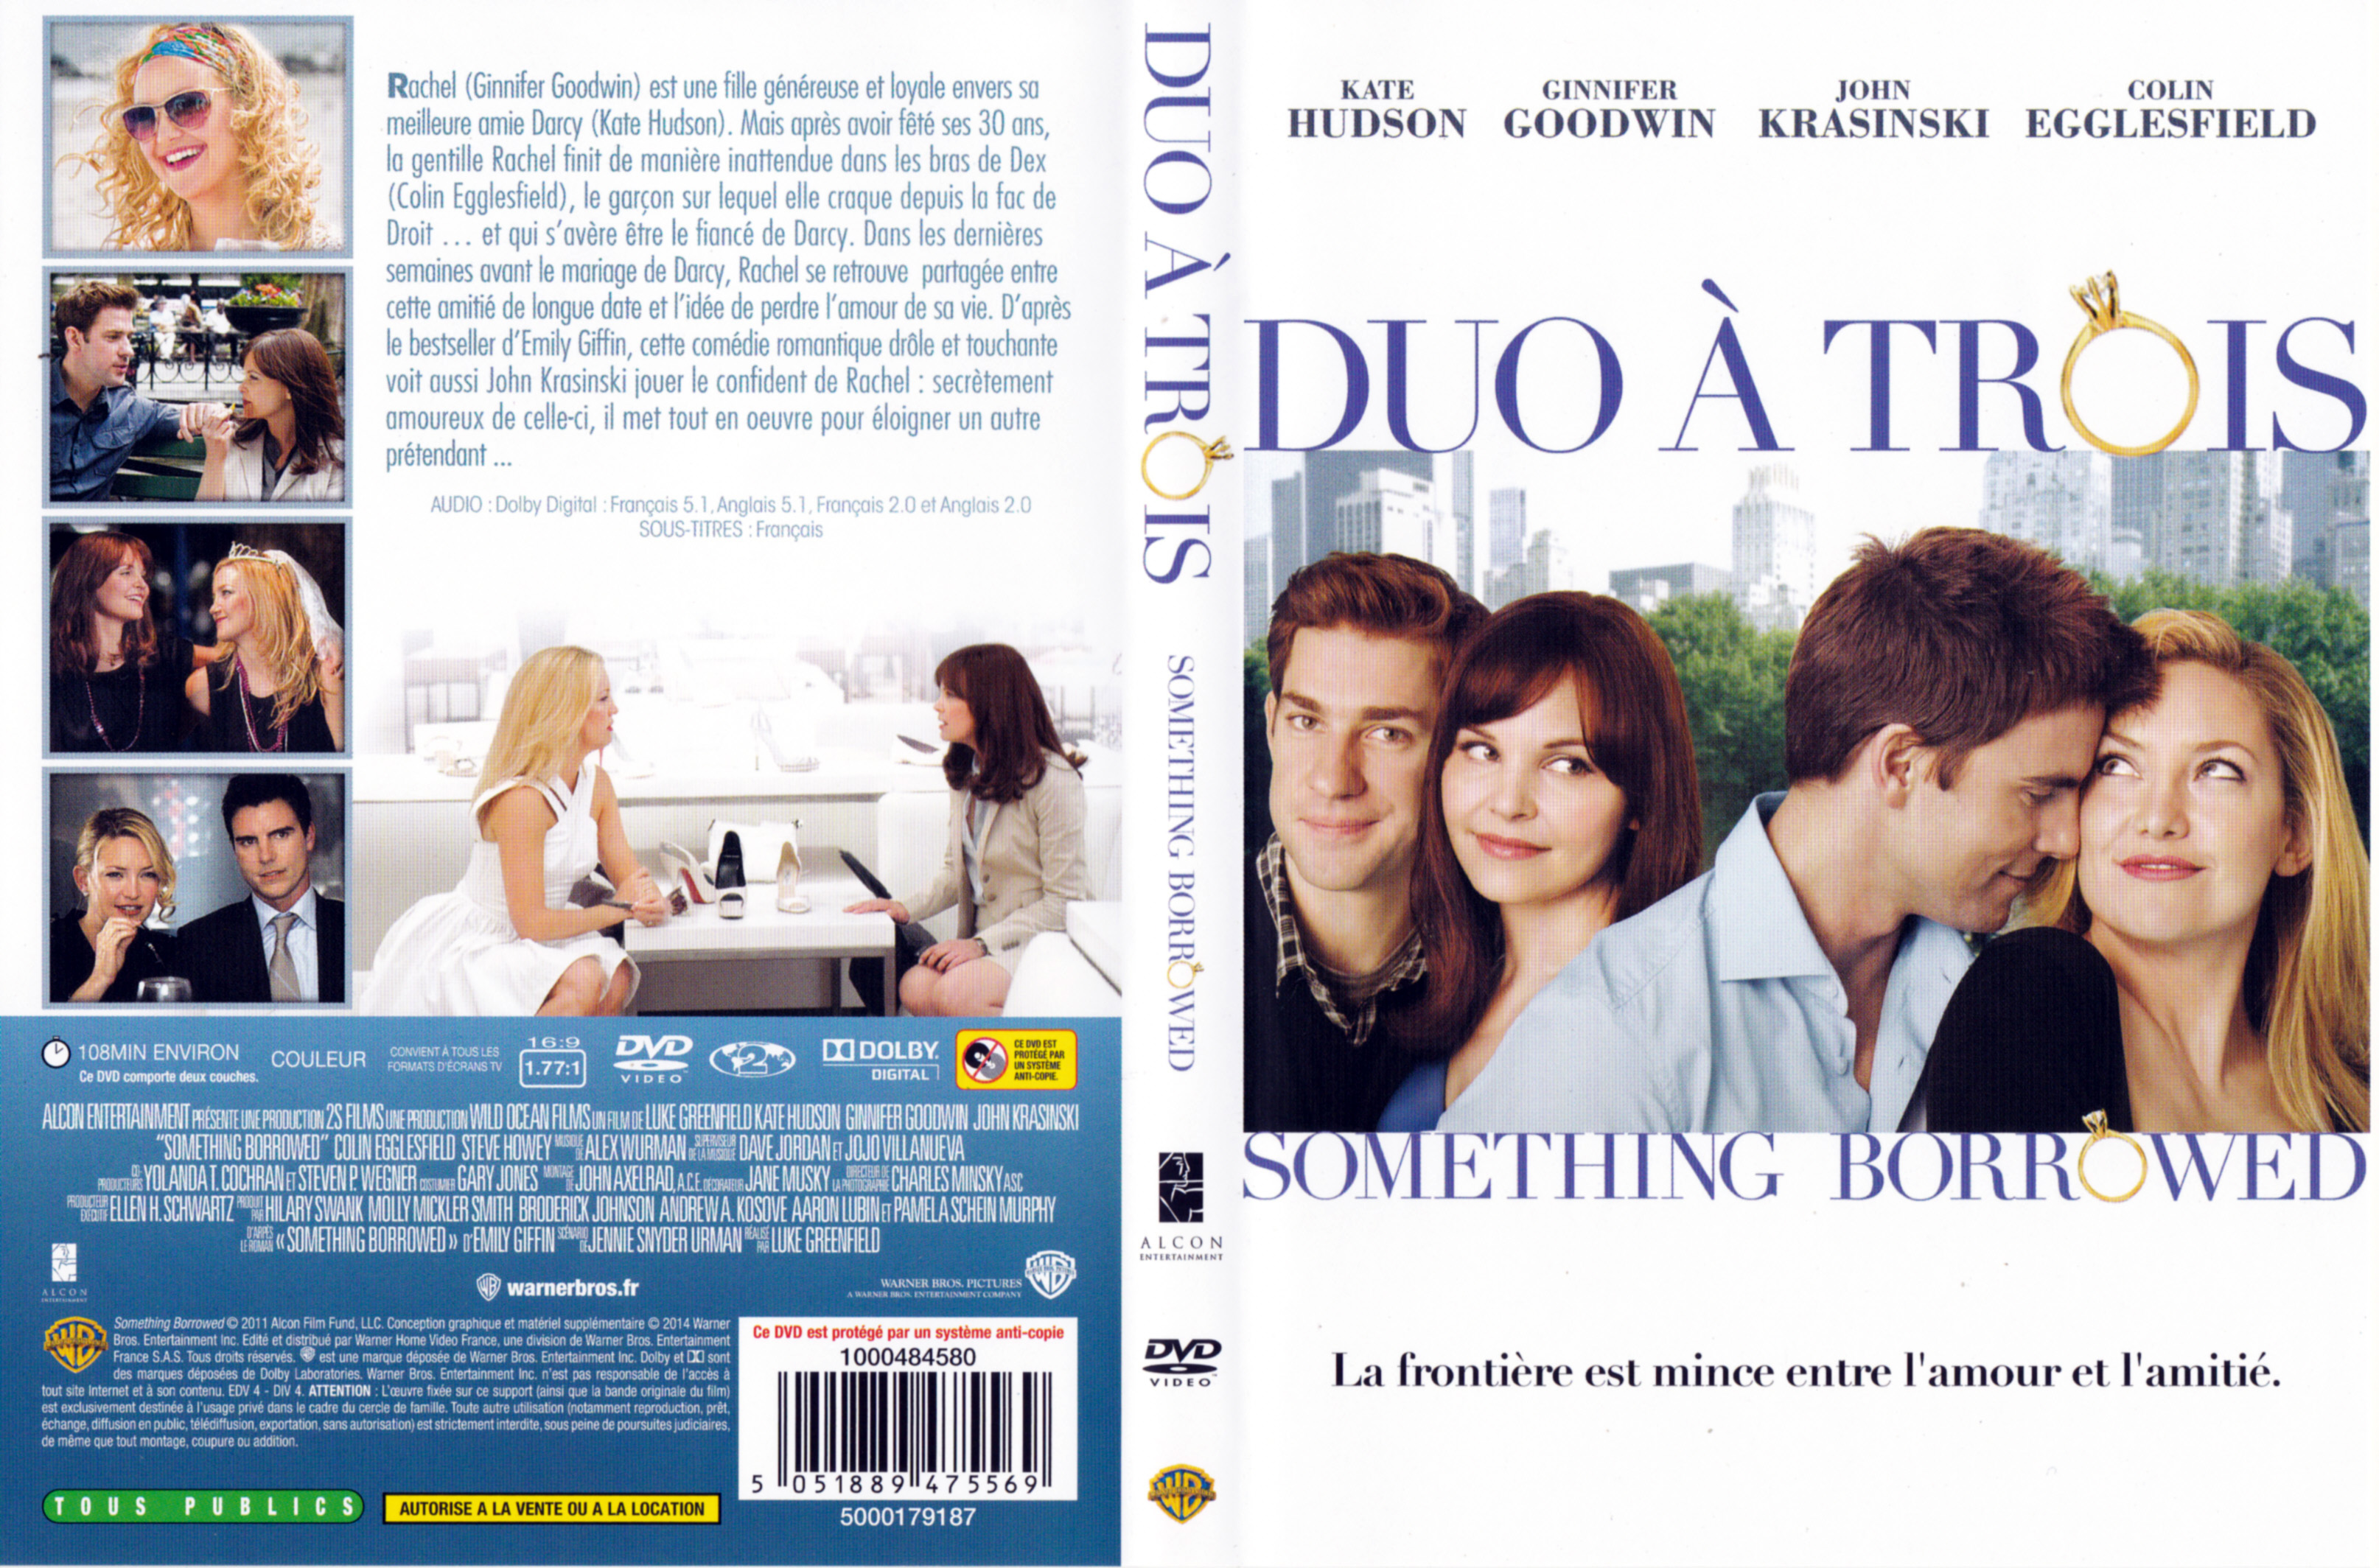 Jaquette DVD Something Borrowed - Duo  trois